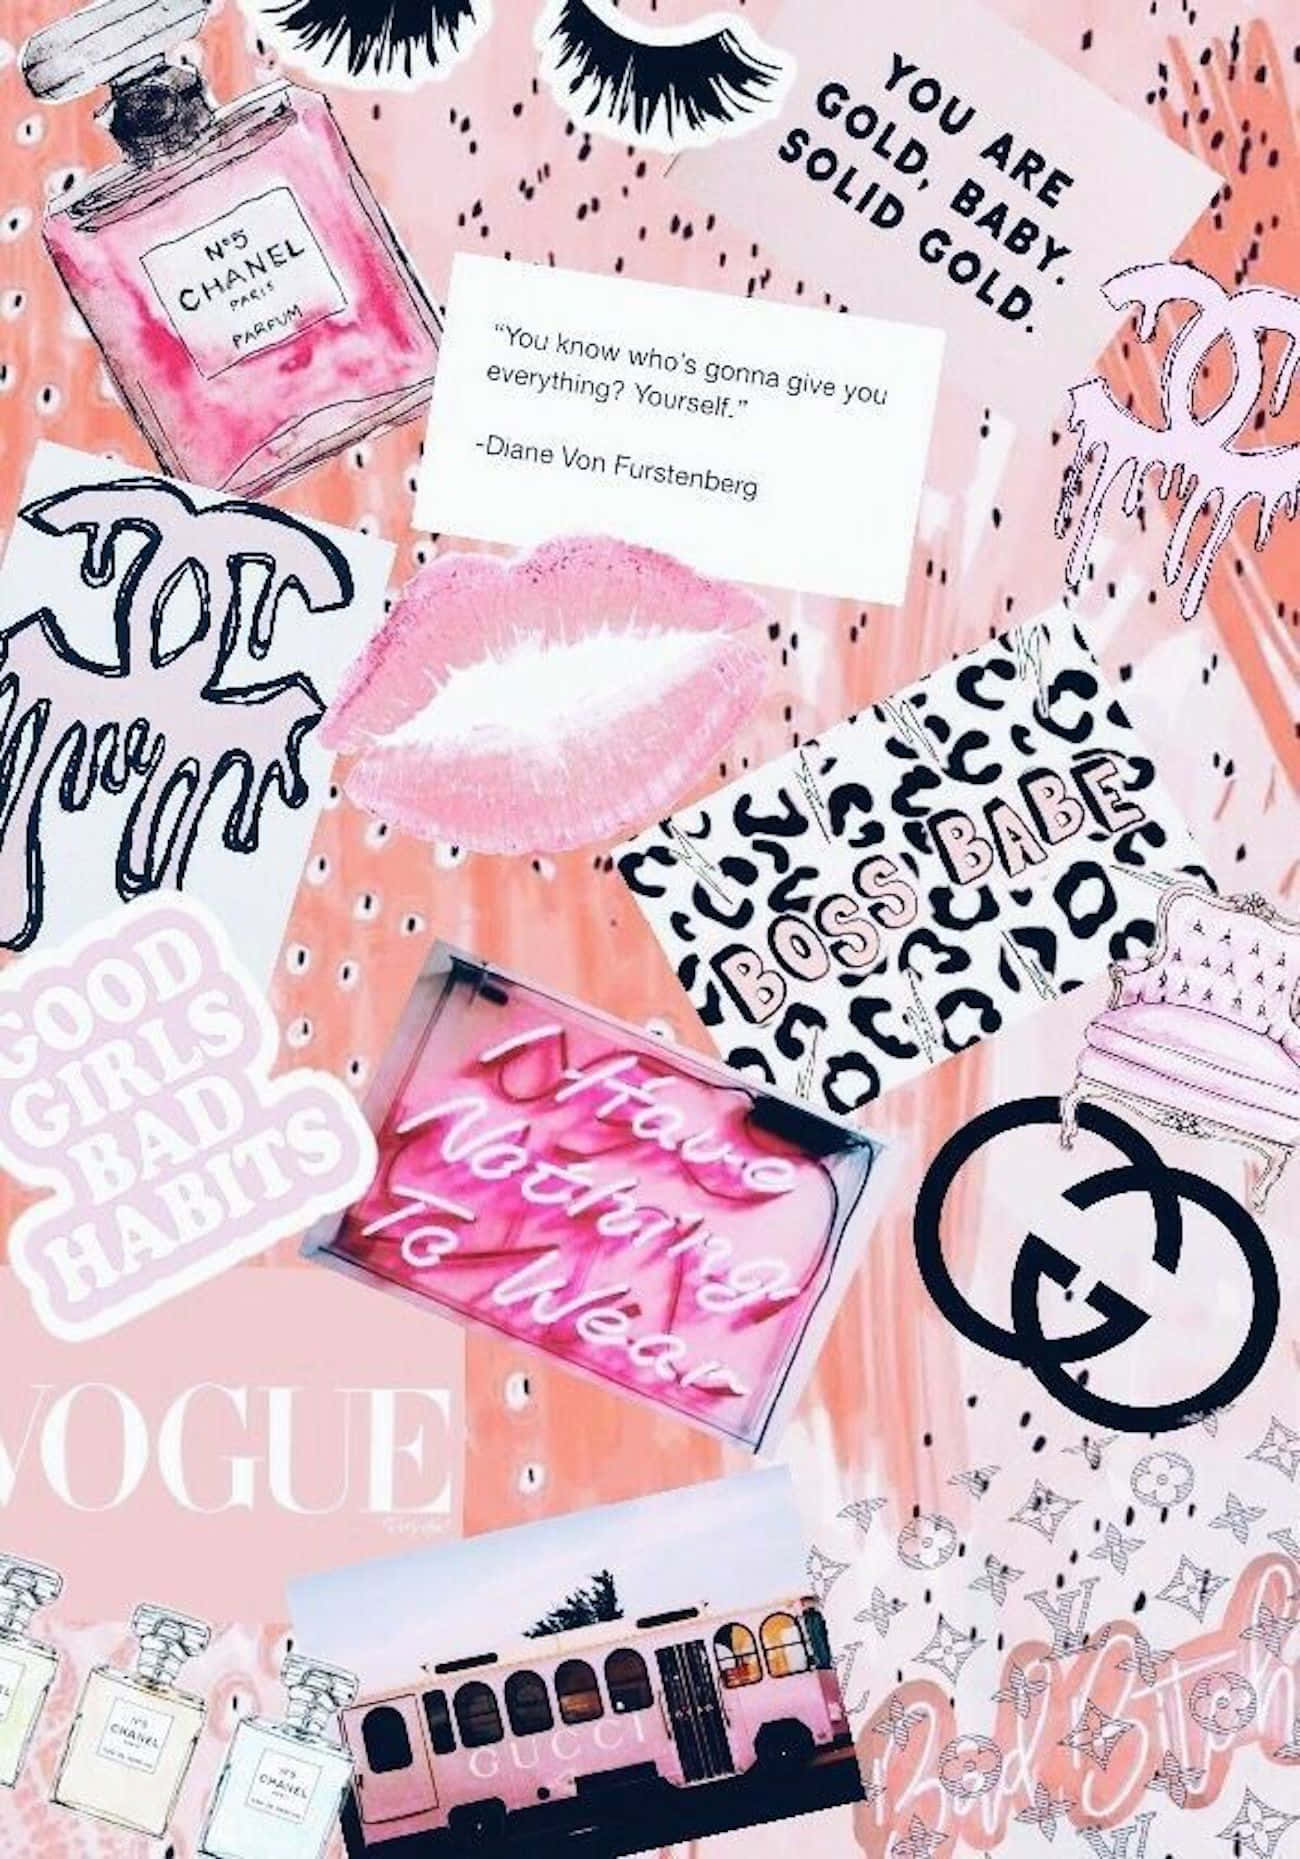 Aesthetic Pink Collage Brand Logos And Girly Stuff